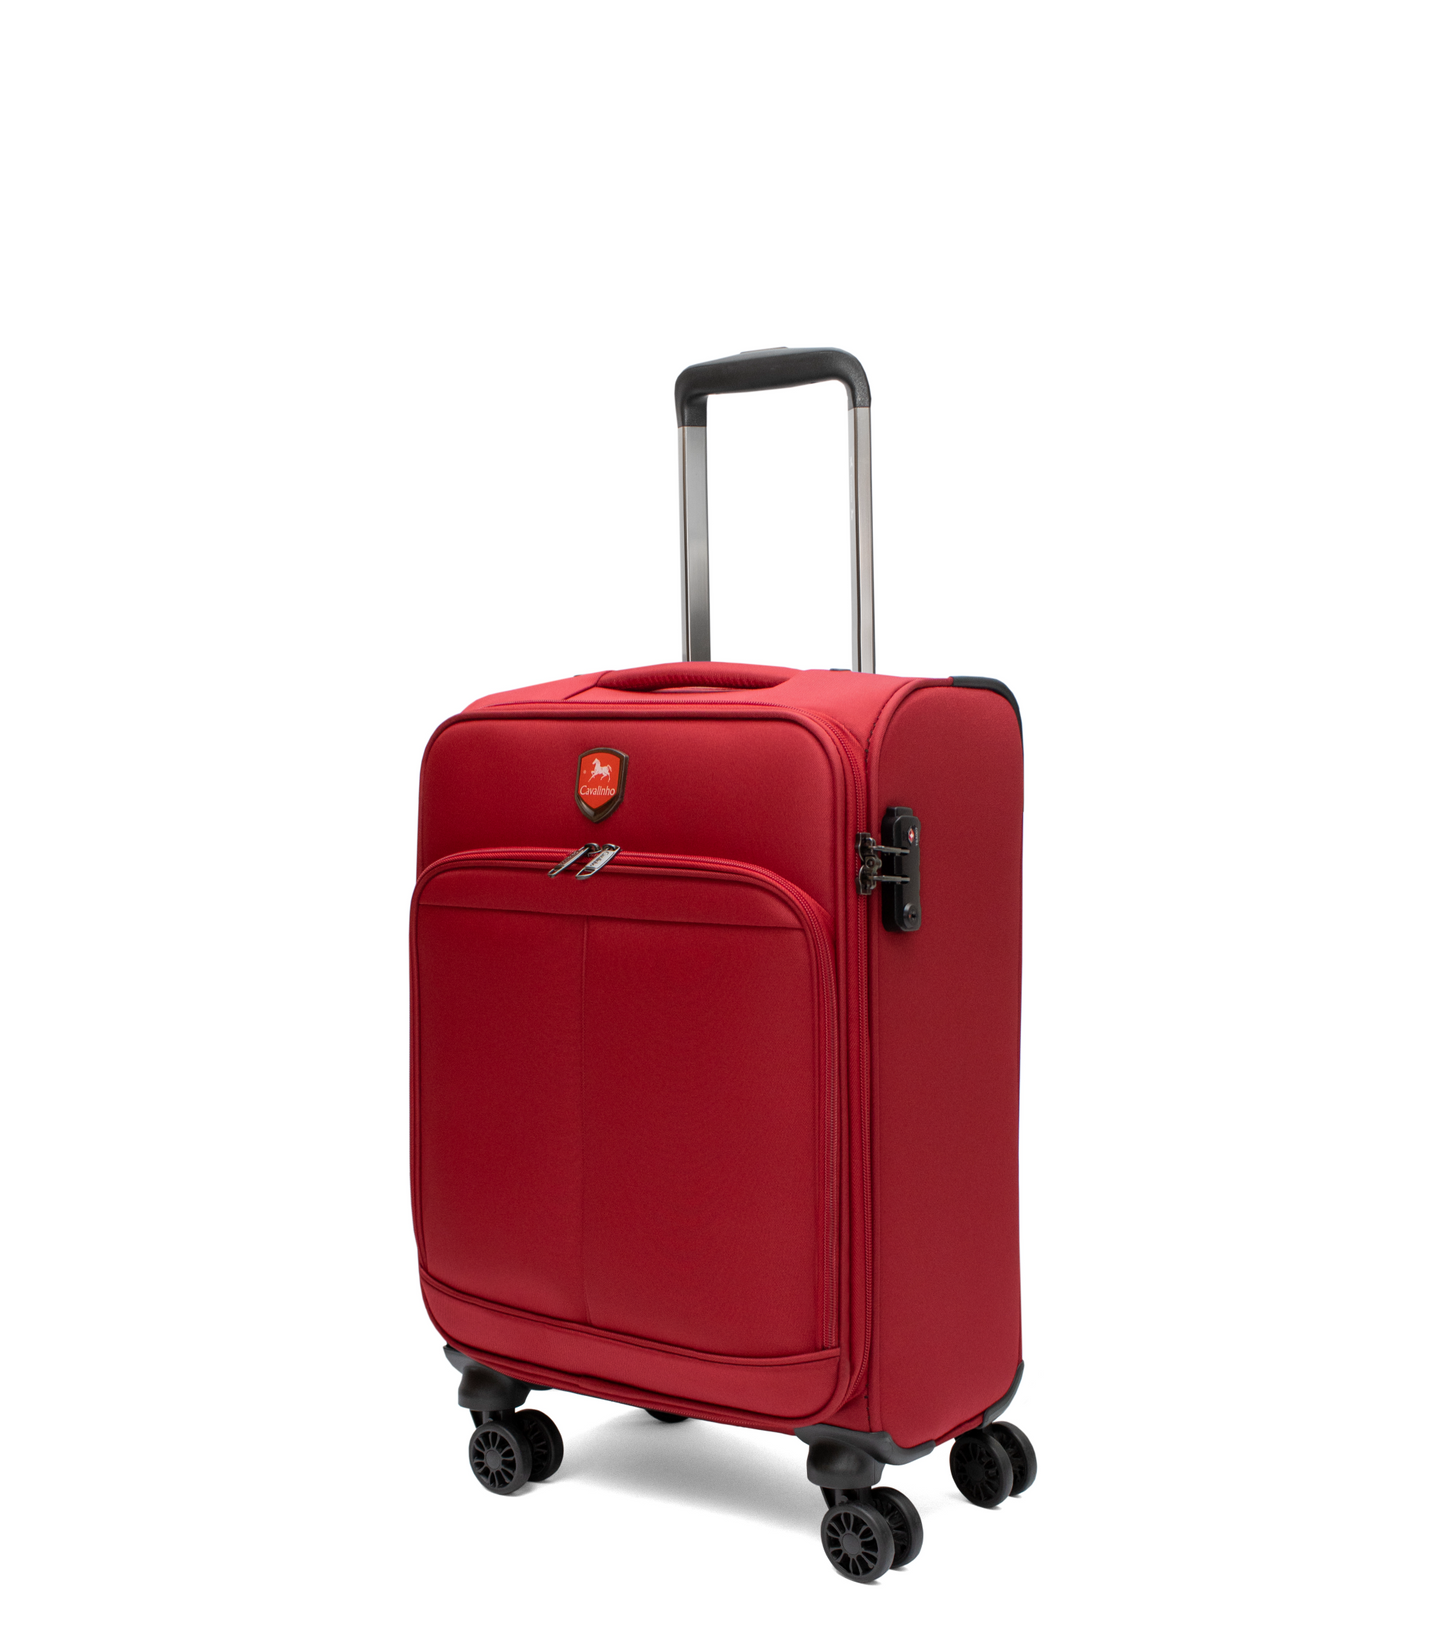 Cavalinho Carry-on Softside Cabin Luggage (16" or 19") - 19 inch Red - 68020003.04.19_2